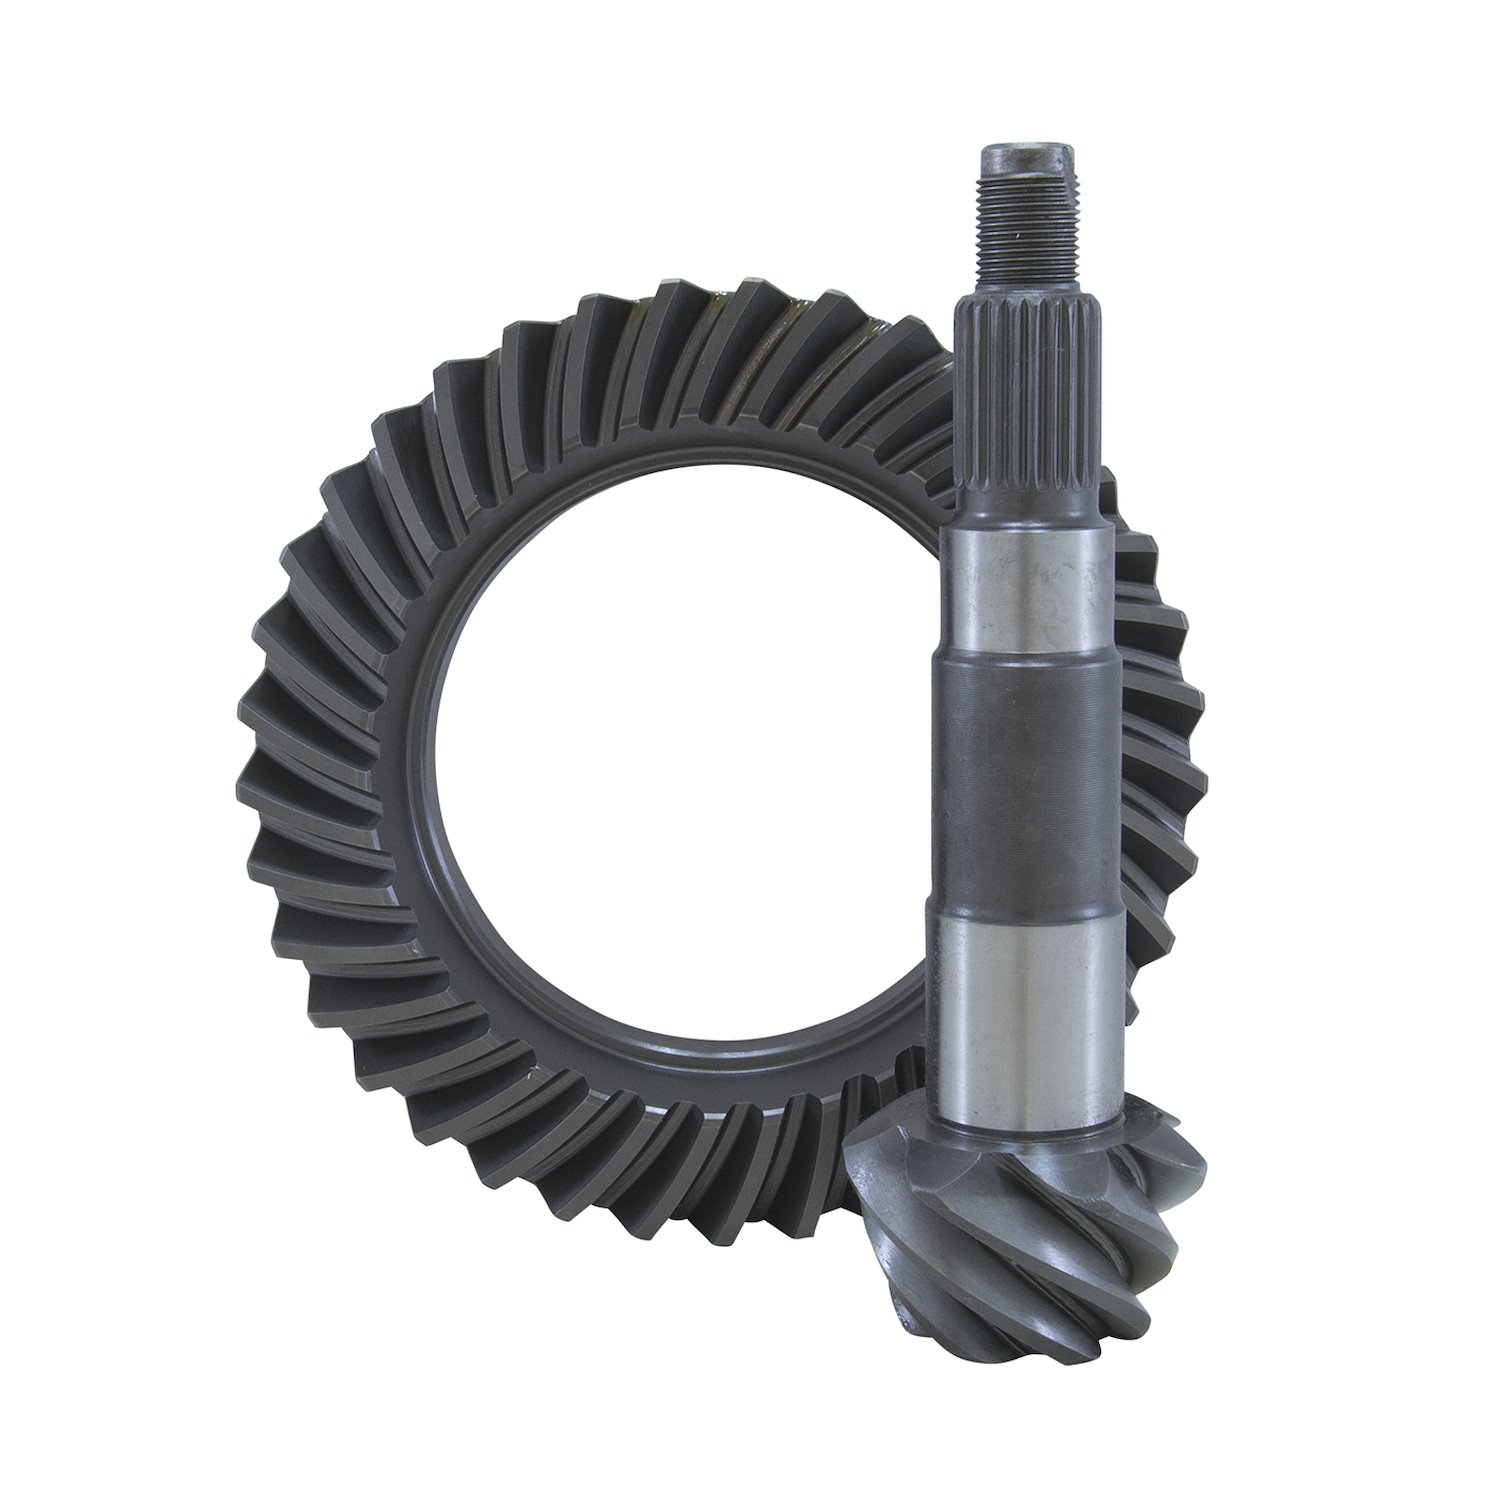 USA Standard ZG T7.5-529 Ring & Pinion Gear Set, For Toyota 7.5 in., 5.29 Ratio